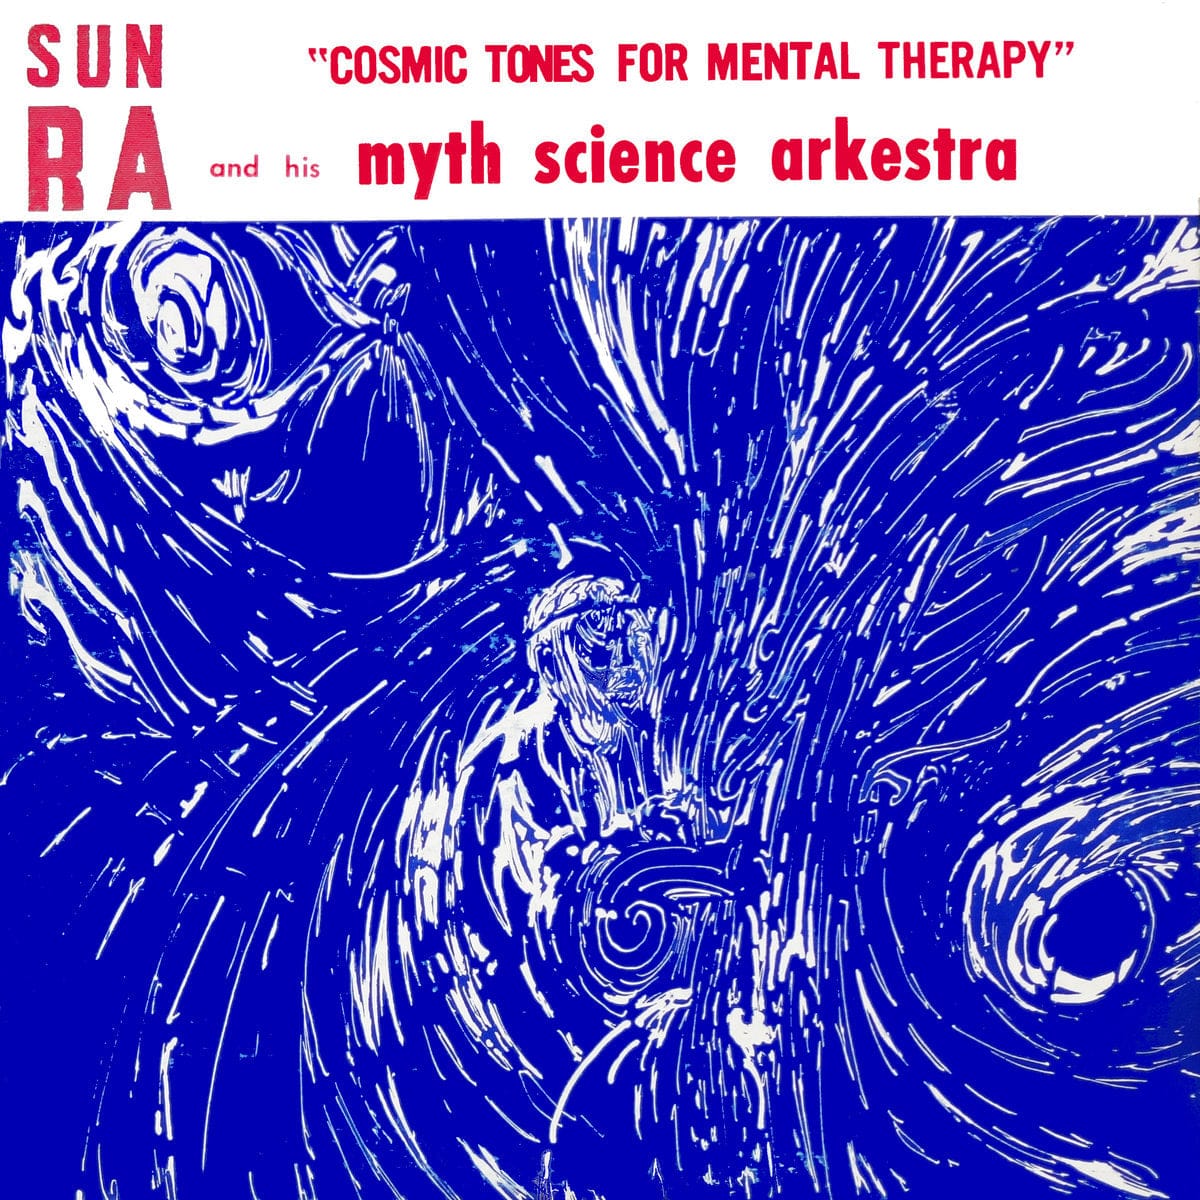 SUN RA AND HIS MYTH SCIENCE ARKESTRA: Cosmic Tones For Mental Therapy LP